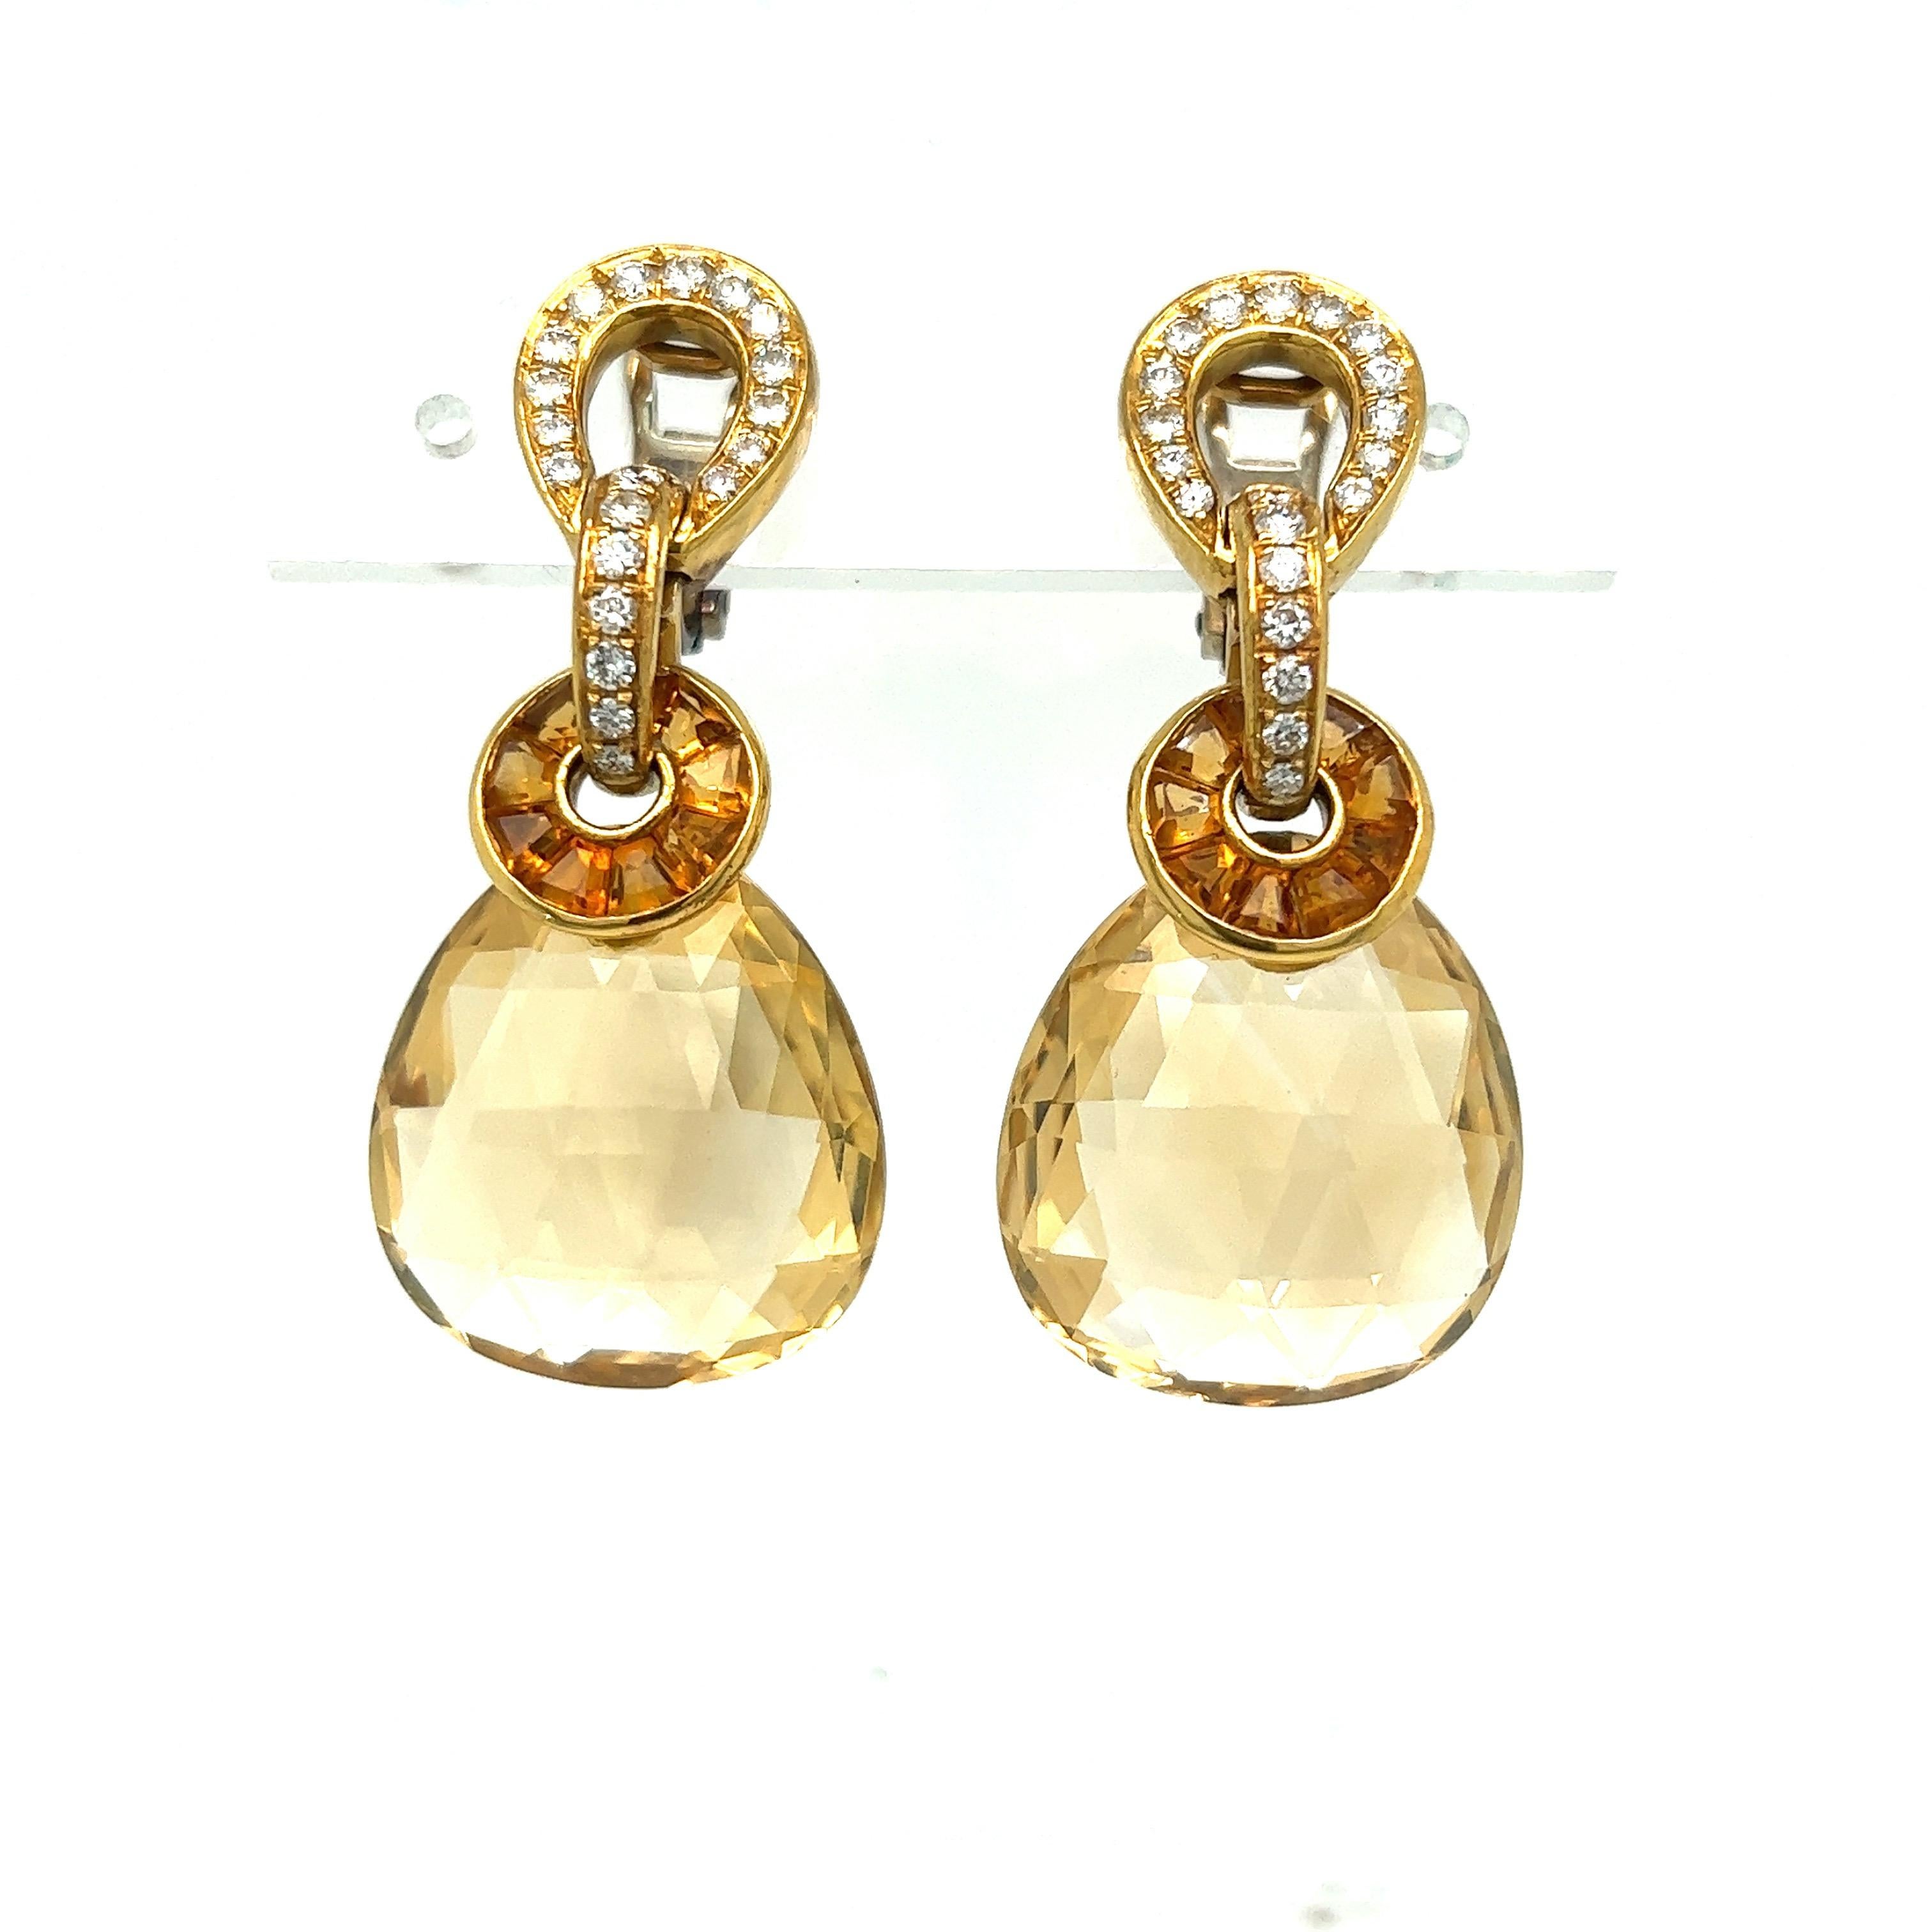 Citrine diamond dangling ear clips

Brilliant-cut diamonds of approximately 0.80 carat, 18 karat yellow gold; marked 750

Size: width 0.75 inch, length 1.75 dangling
Total weight: 22.0 grams